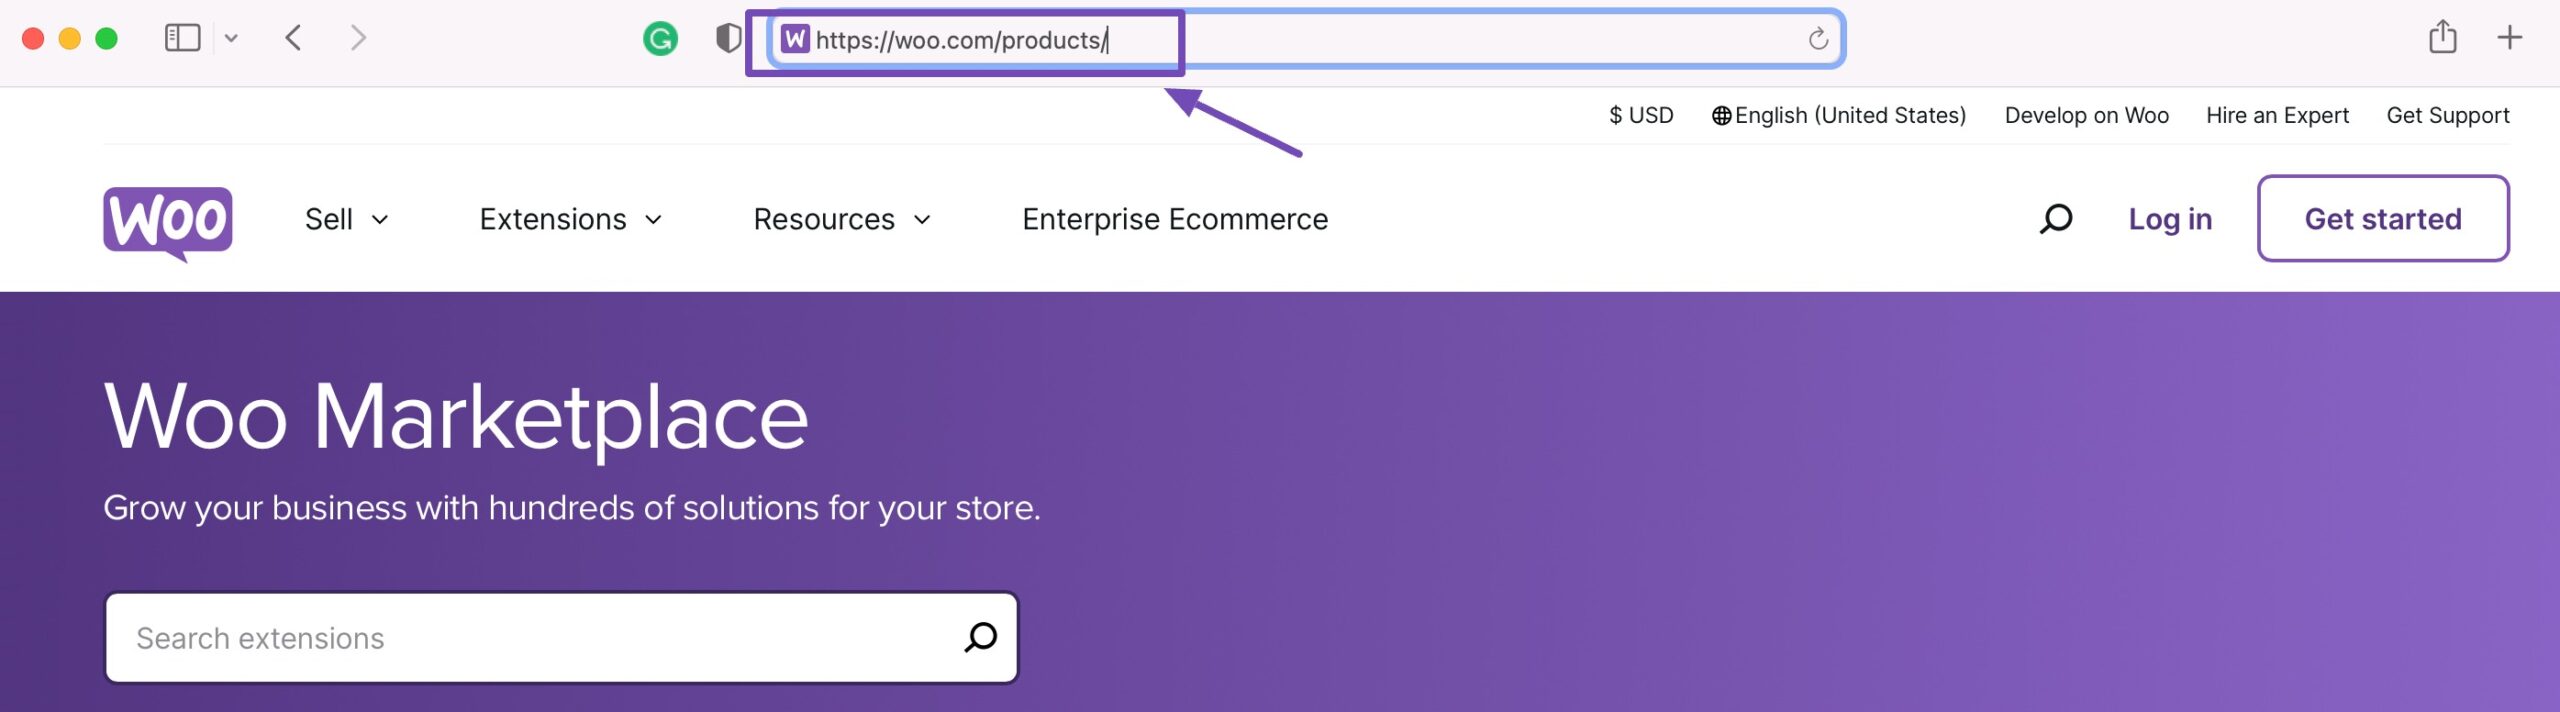 Subfolder example for product categories